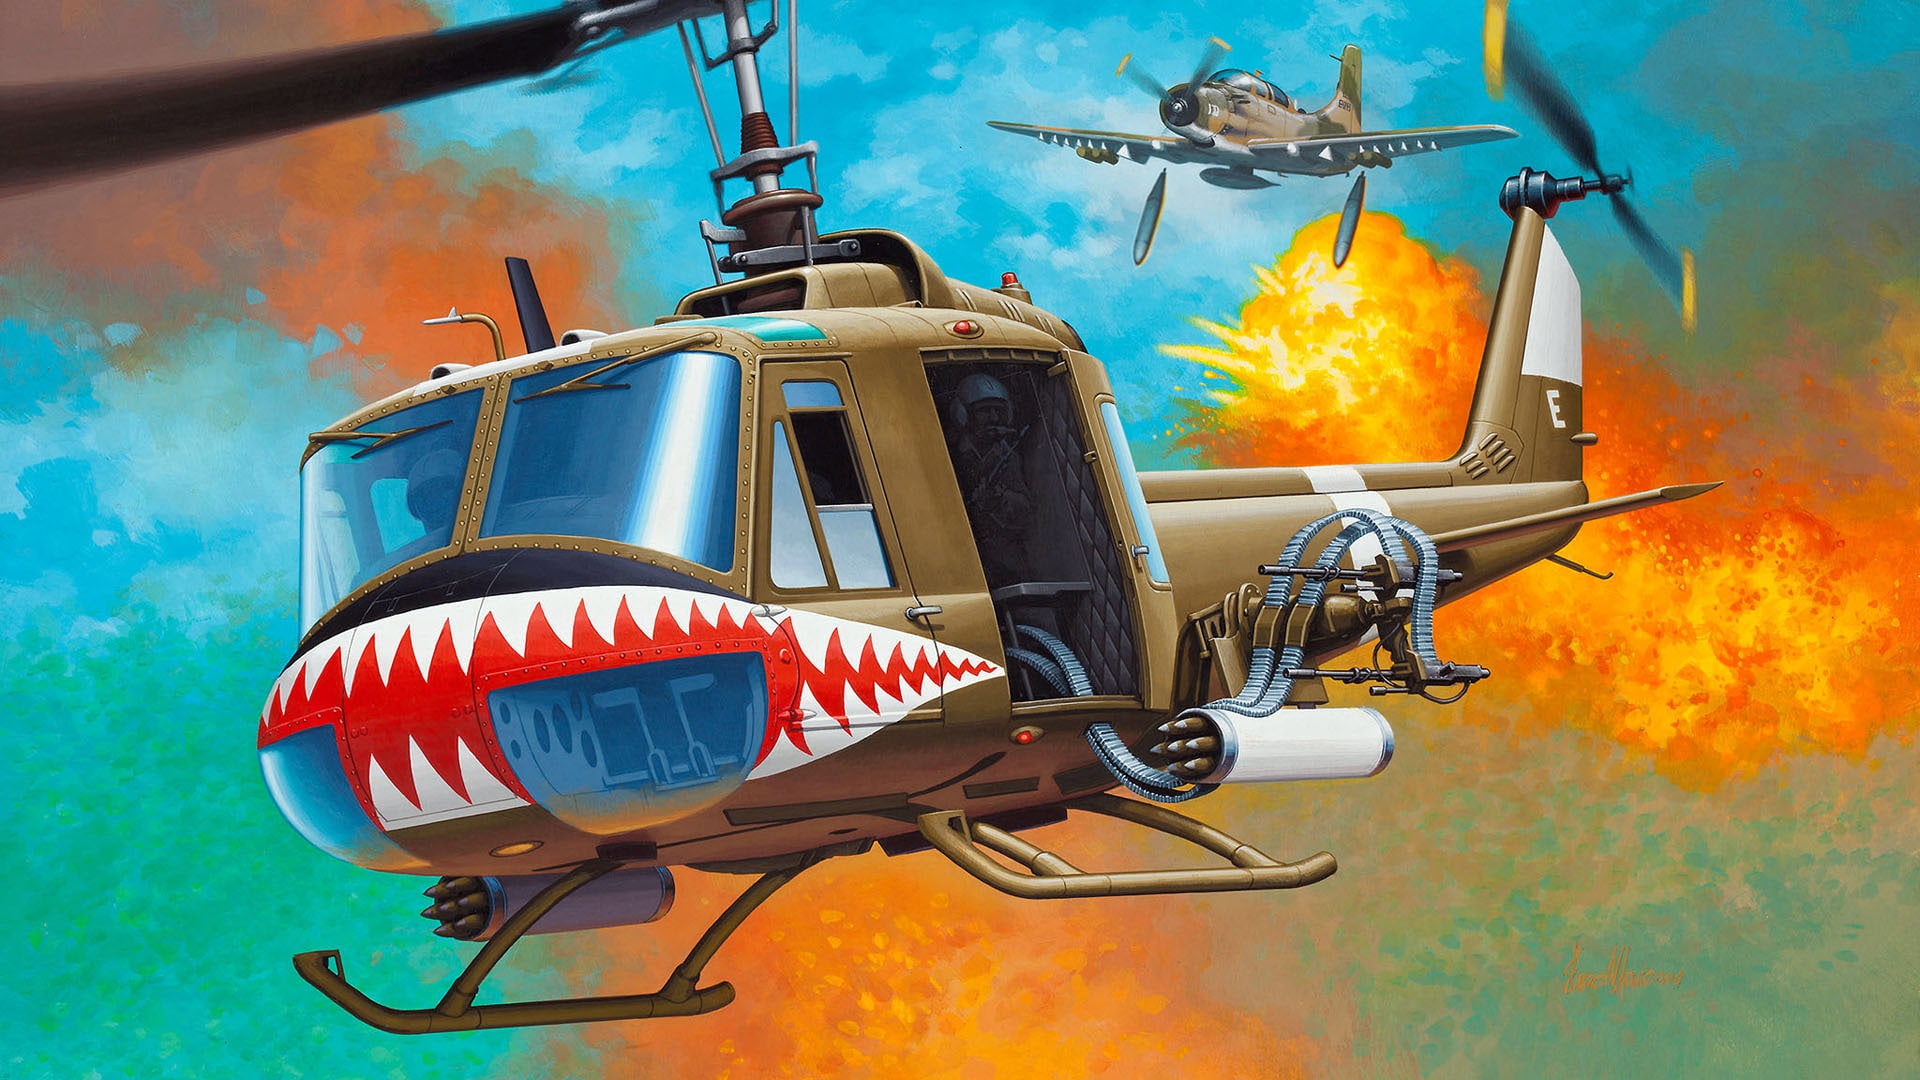 Bell, UH-1, Iroquois, Huey, American multi-purpose helicopter